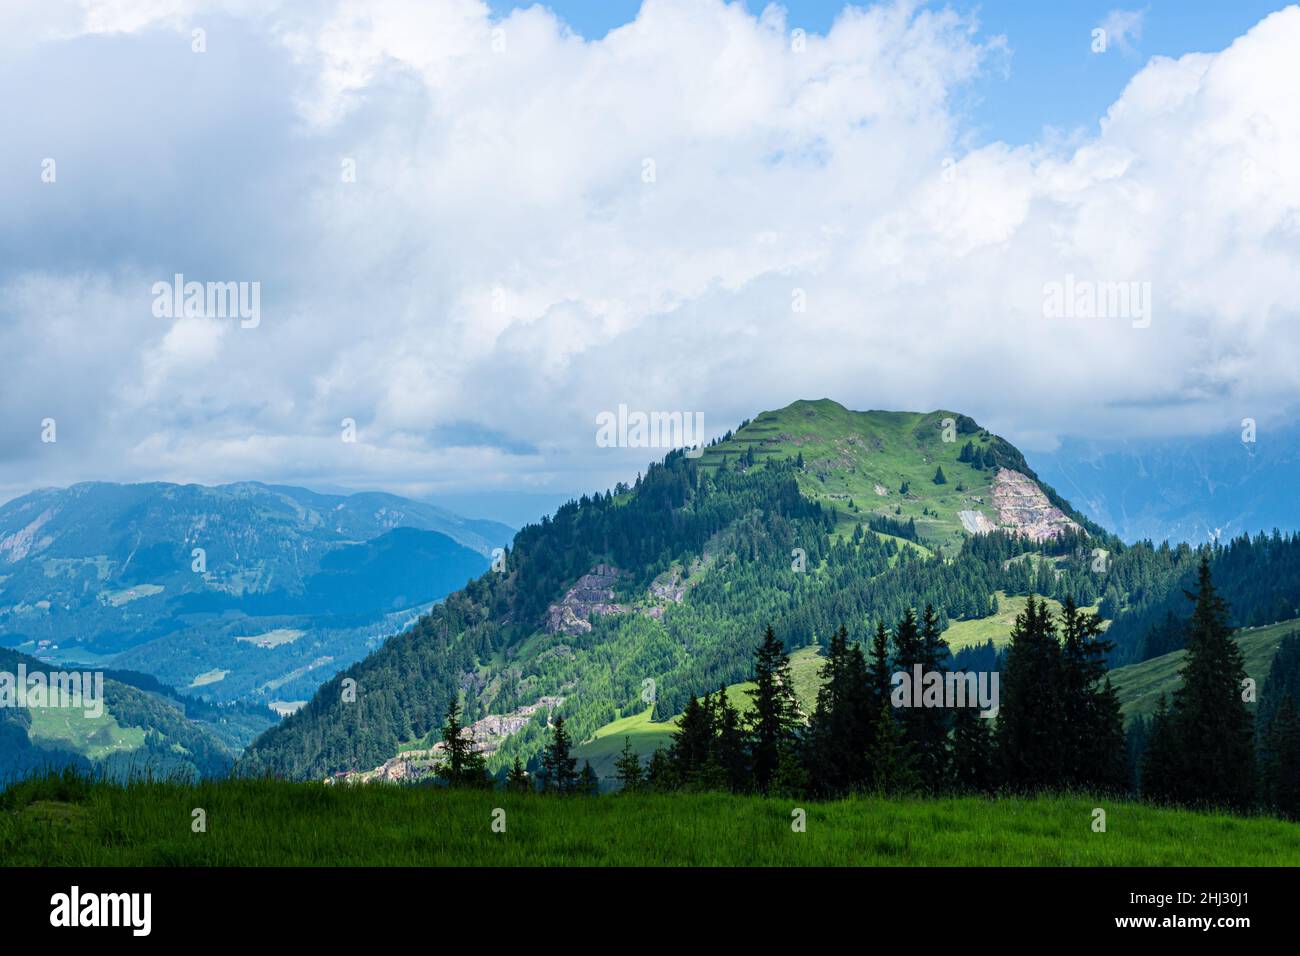 View of the mountains and the X-Press cable car over the bike paths, Saalbach-Hinterglemm, Alps, Austria Stock Photo